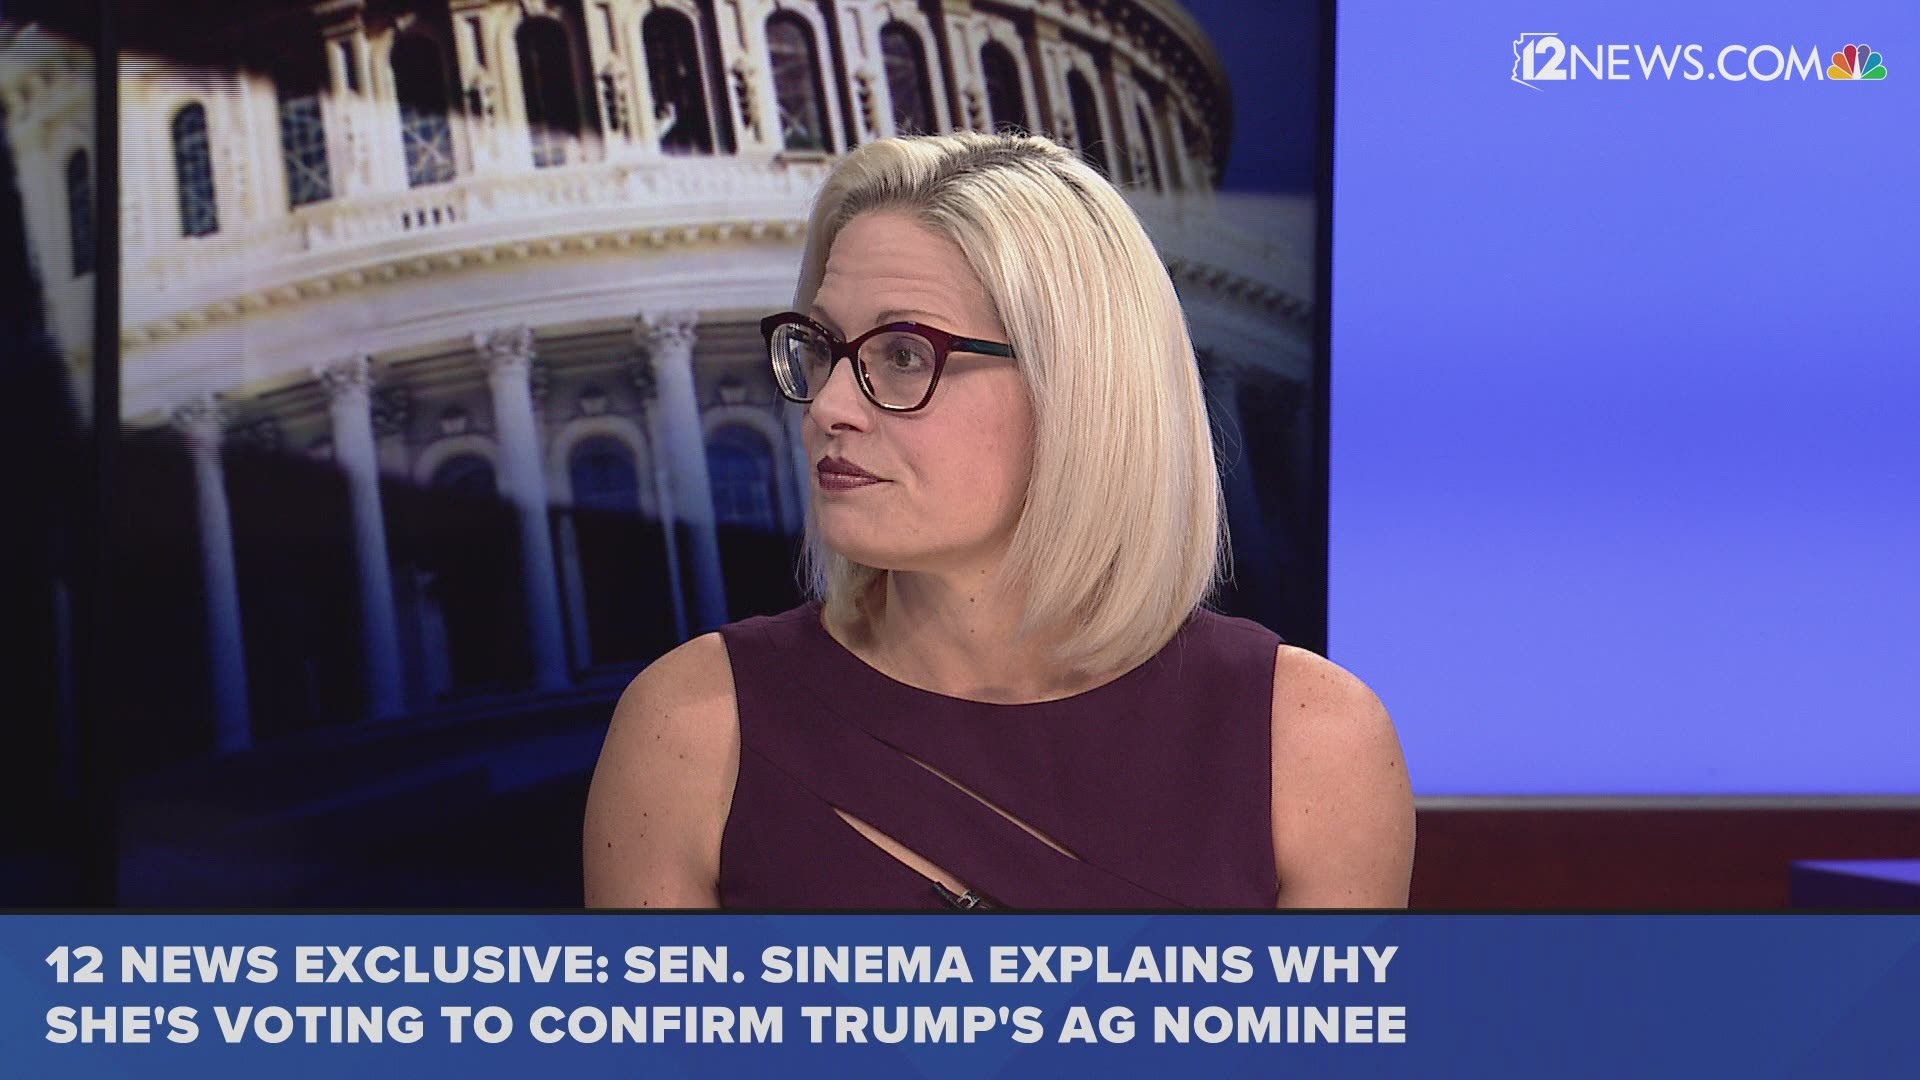 In this exclusive interview with 12 News,  Democratic U.S. Sen. Kyrsten Sinema explains why she's voting to confirm President Trump's attorney general nominee, William Barr.